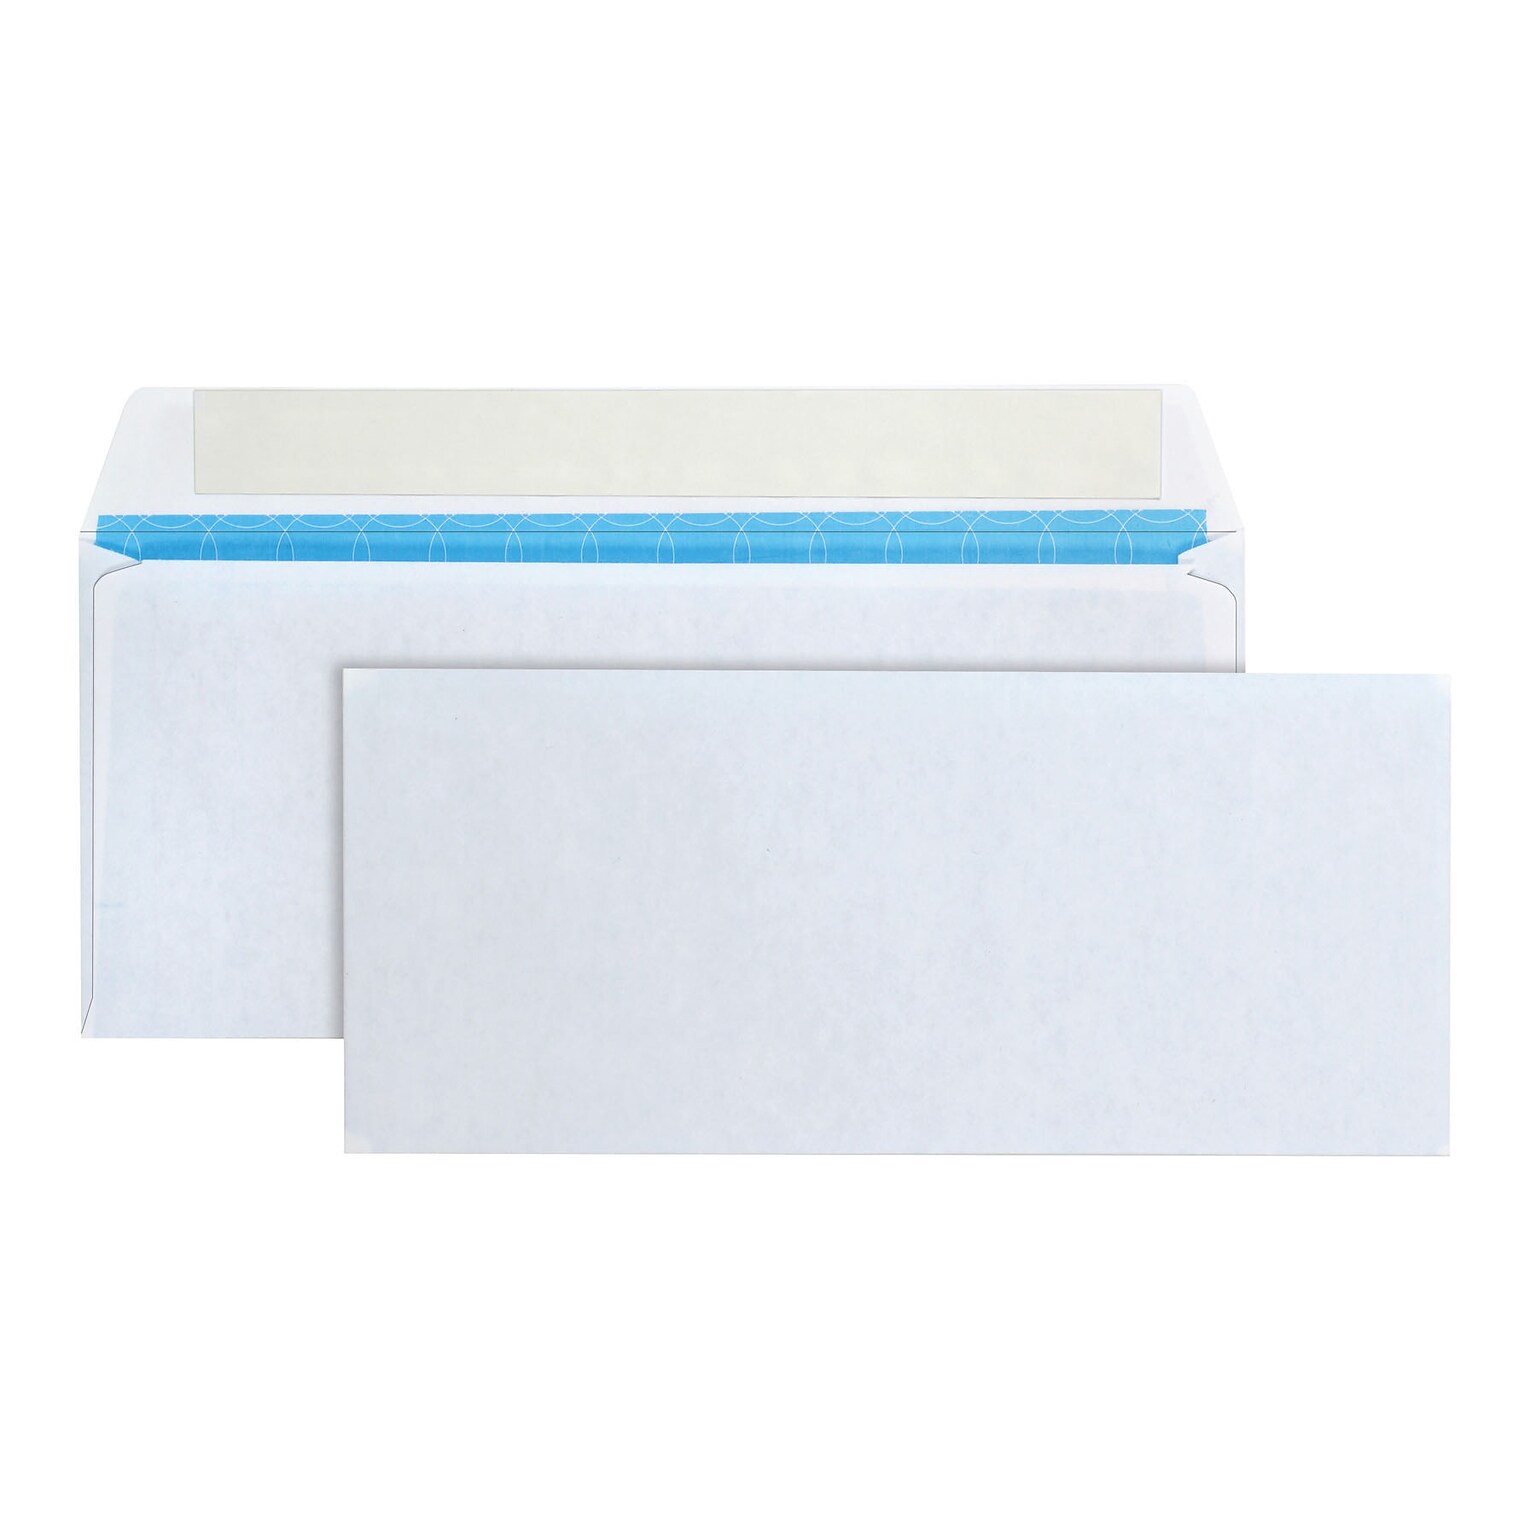 Quality Park Redi-Strip Security Tinted #10 Treated Business Envelopes, 4 1/8 x 9 1/2, White Wove, 500/Box